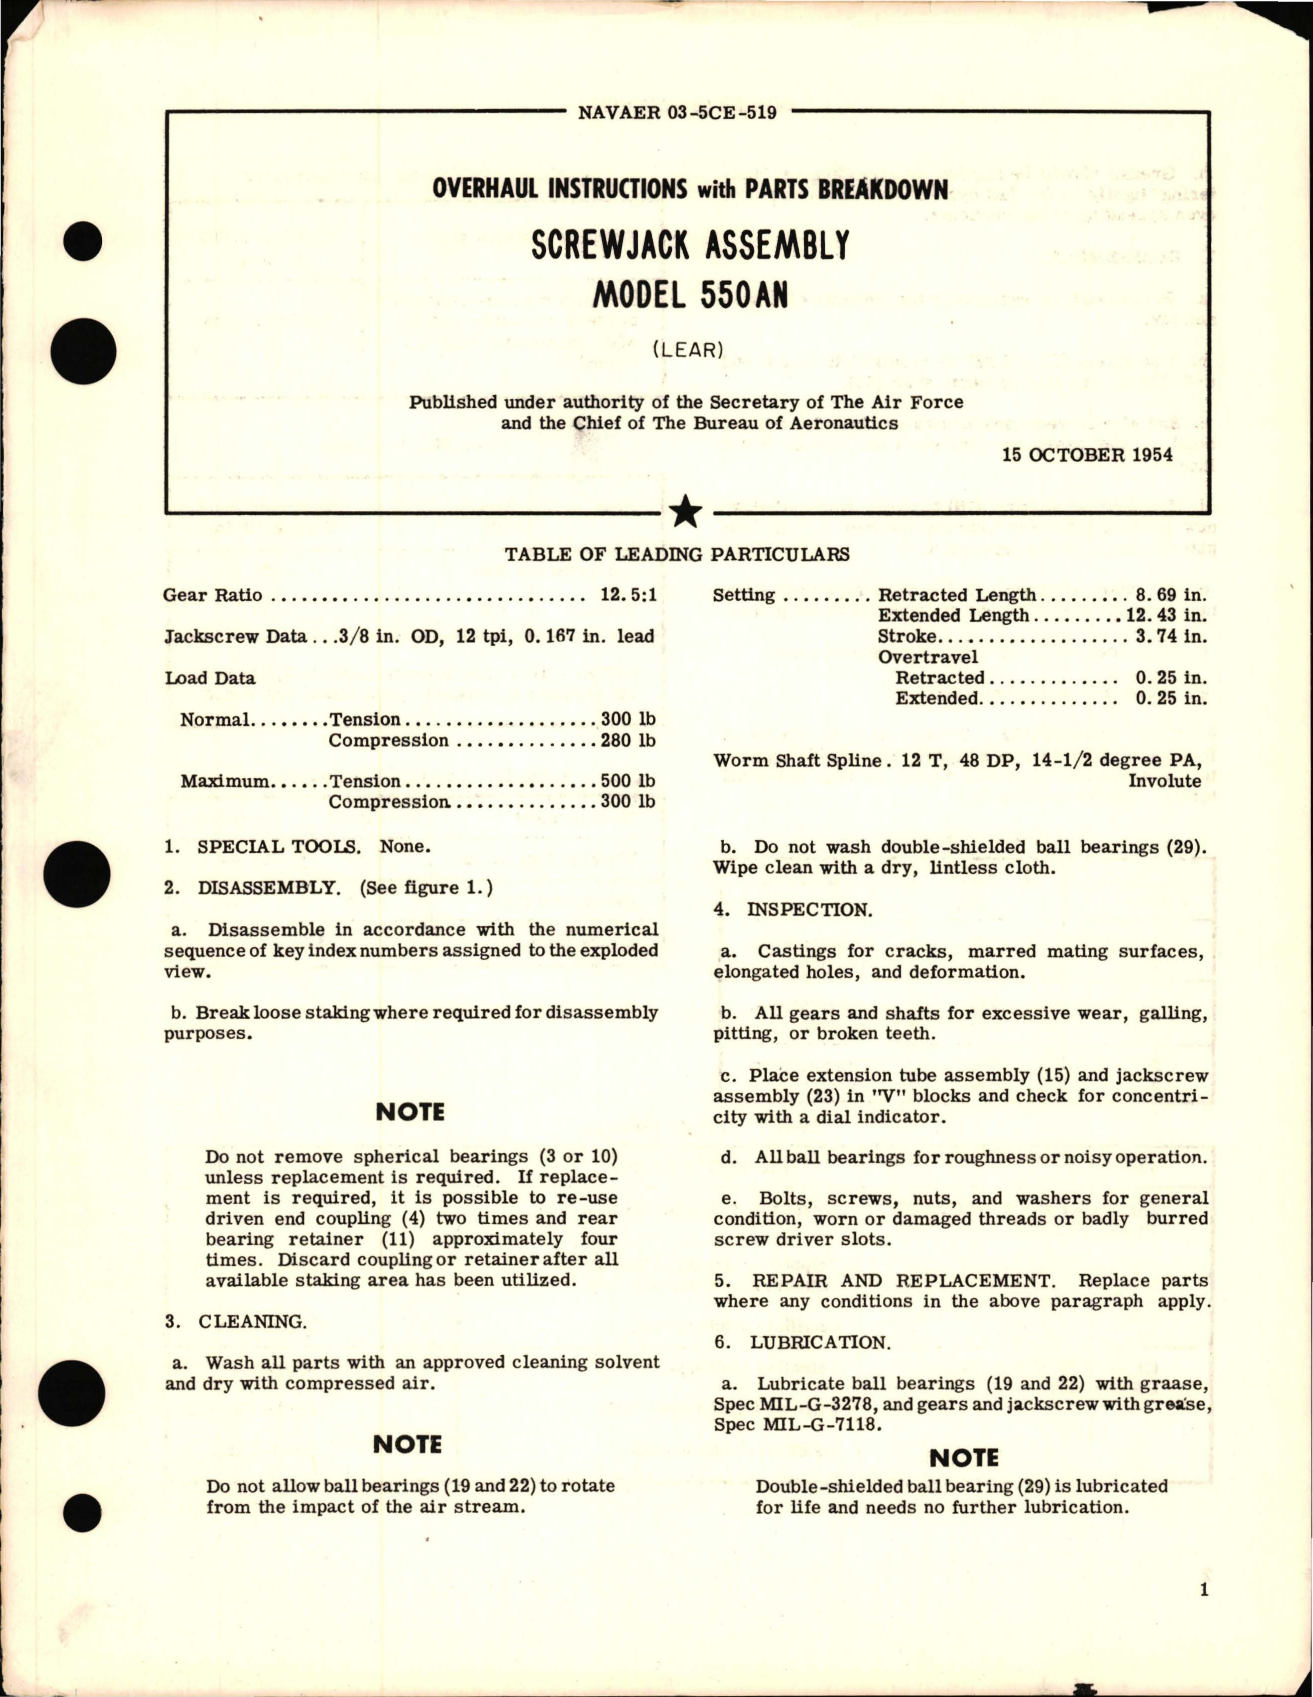 Sample page 1 from AirCorps Library document: Overhaul Instructions with Parts Breakdown for Screwjack Assembly - Model 550AN 